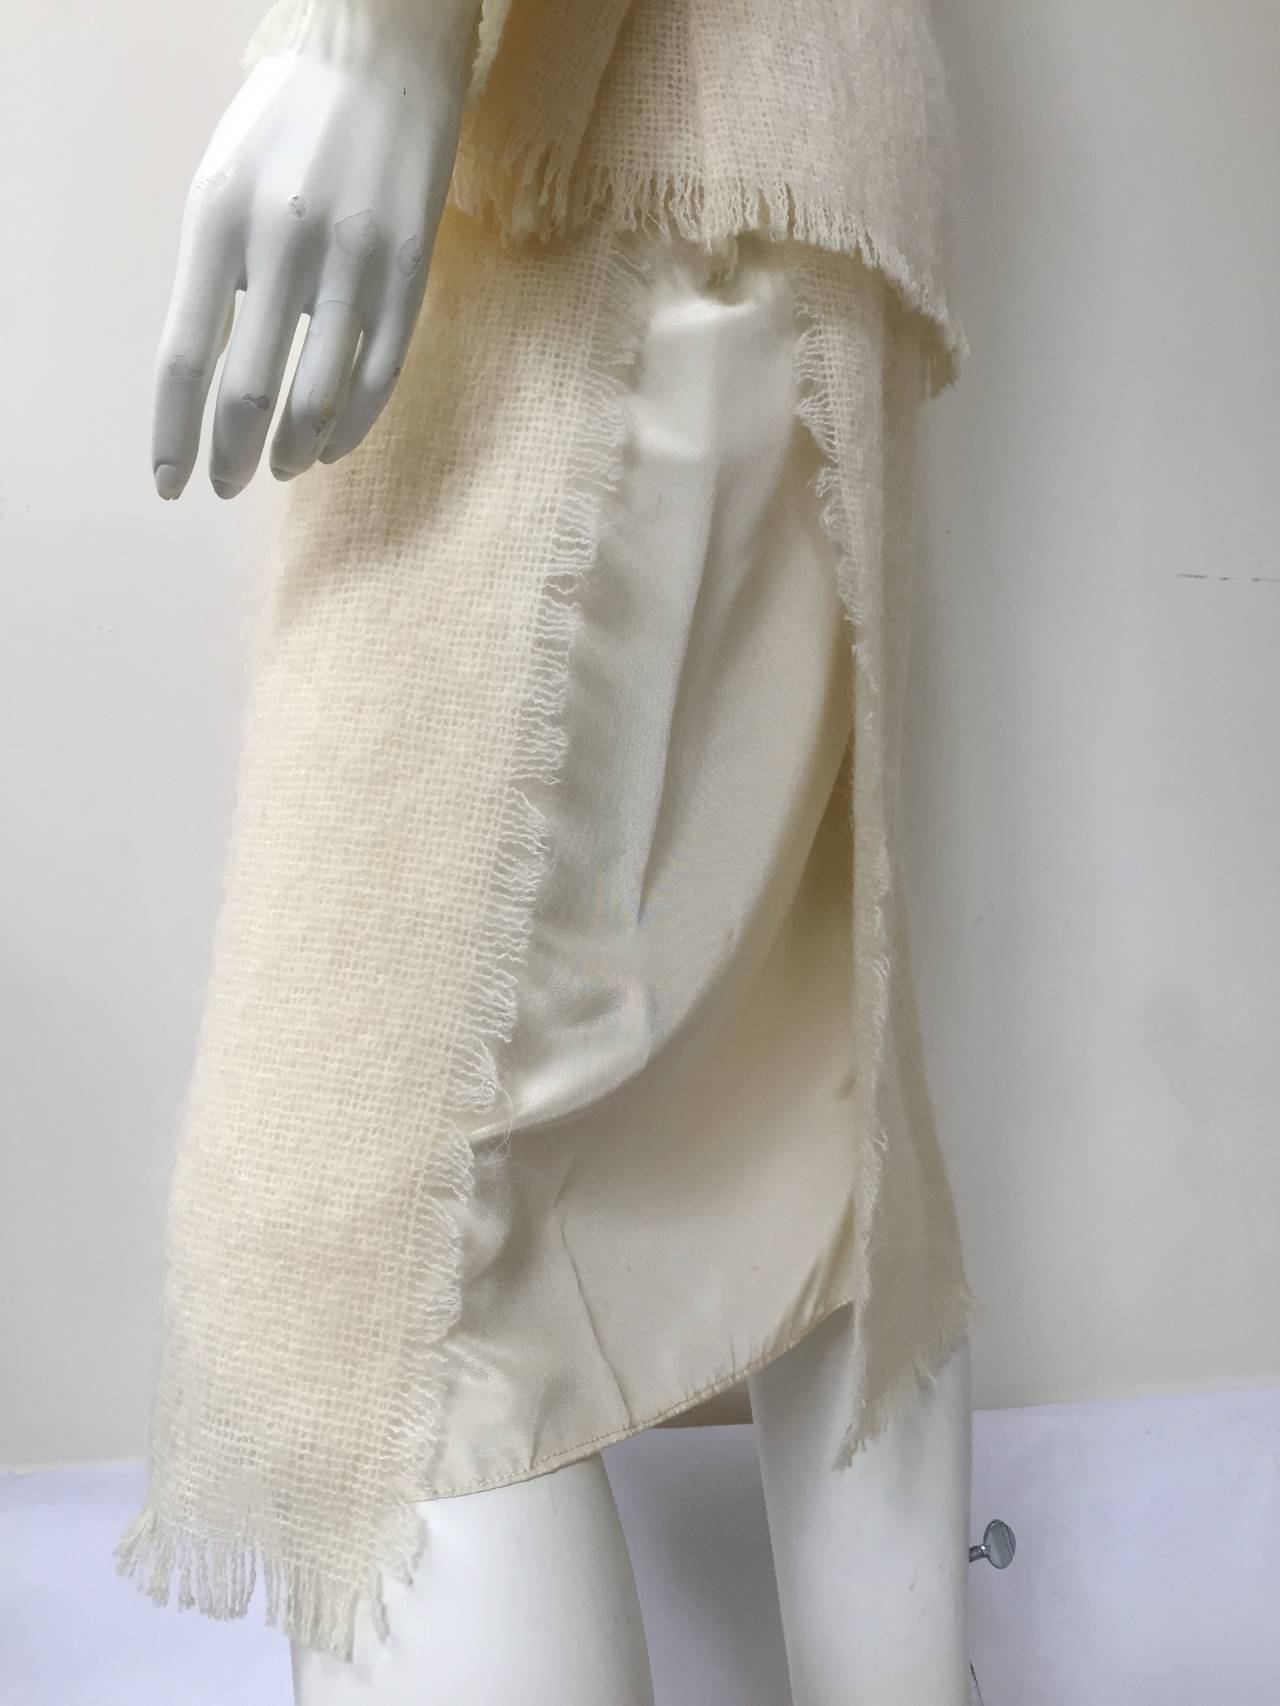 Women's Fiandaca Couturier Silk / Mohair Dress with Jacket Size 6. For Sale